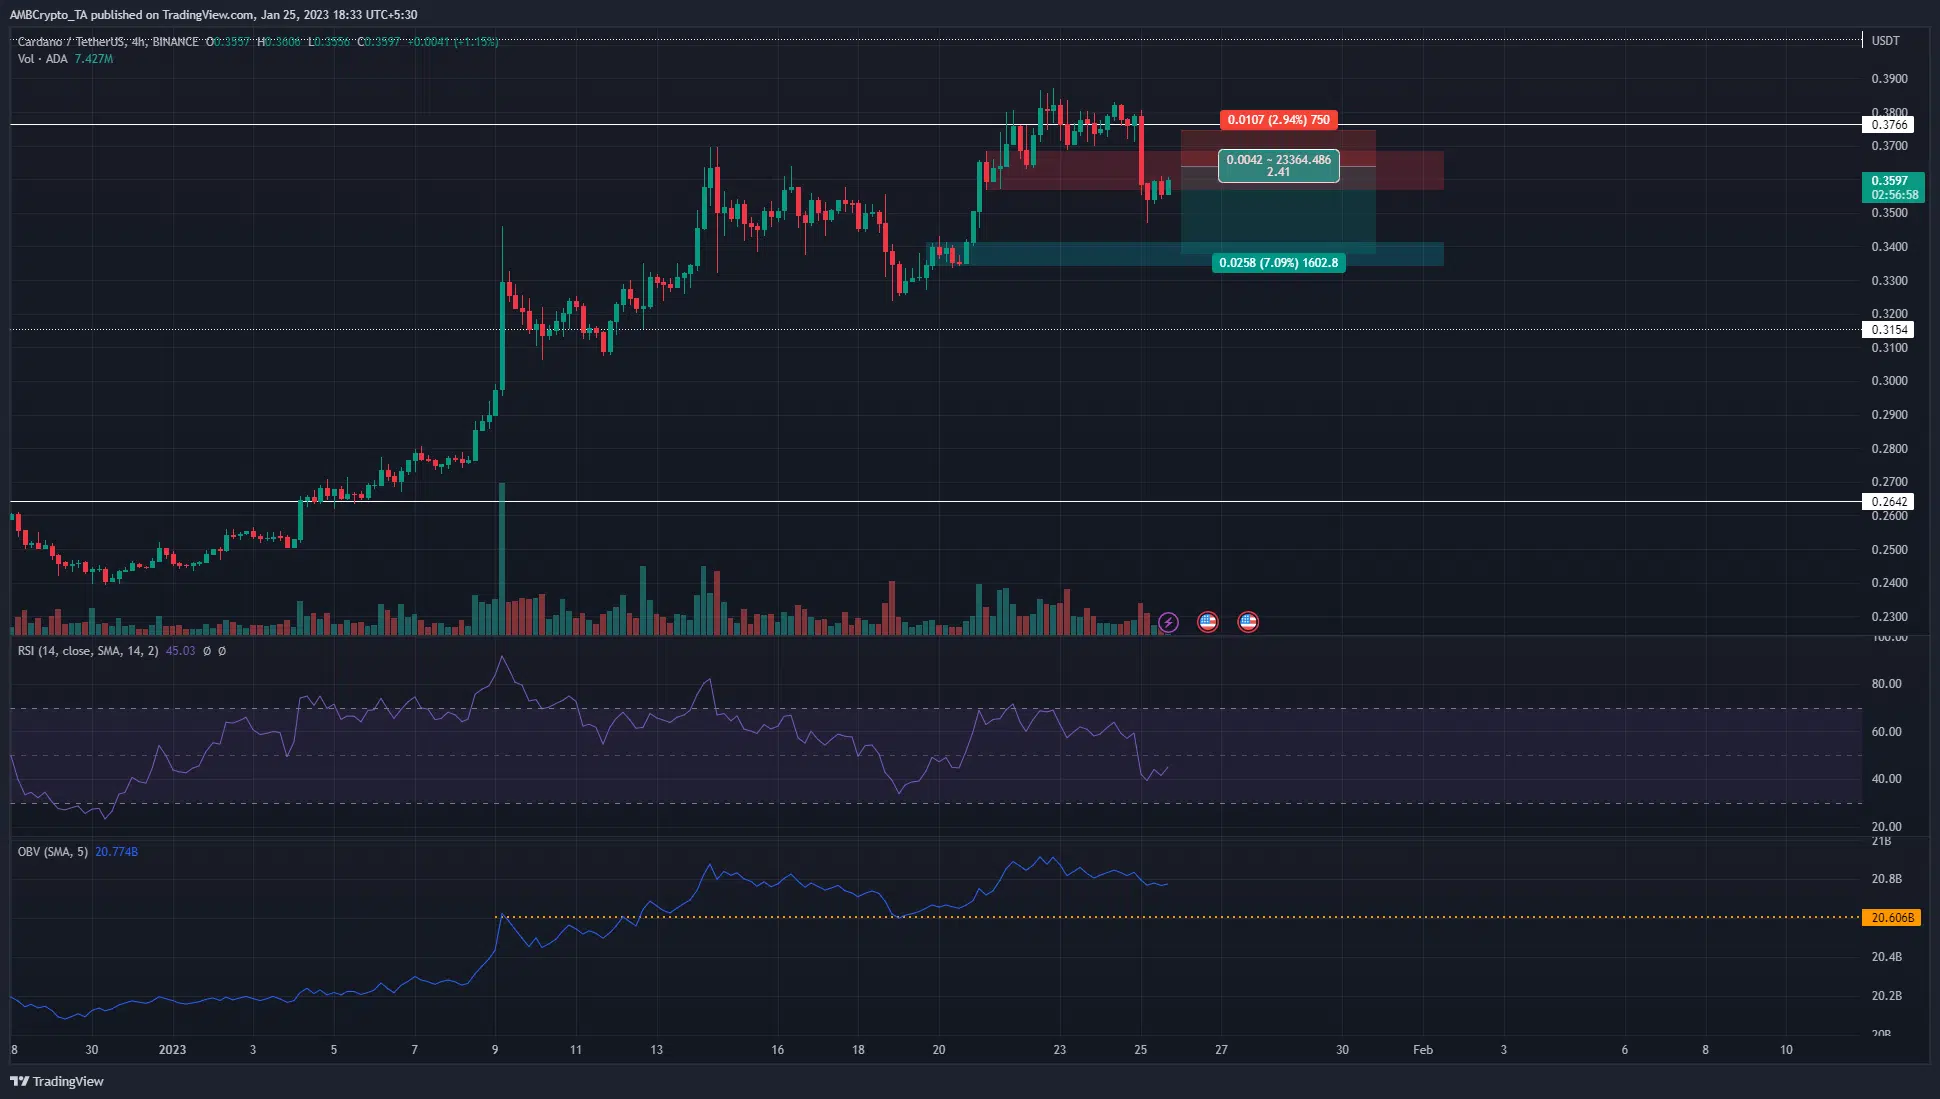 Cardano presents a counter-trend trade opportunity- should you take it?